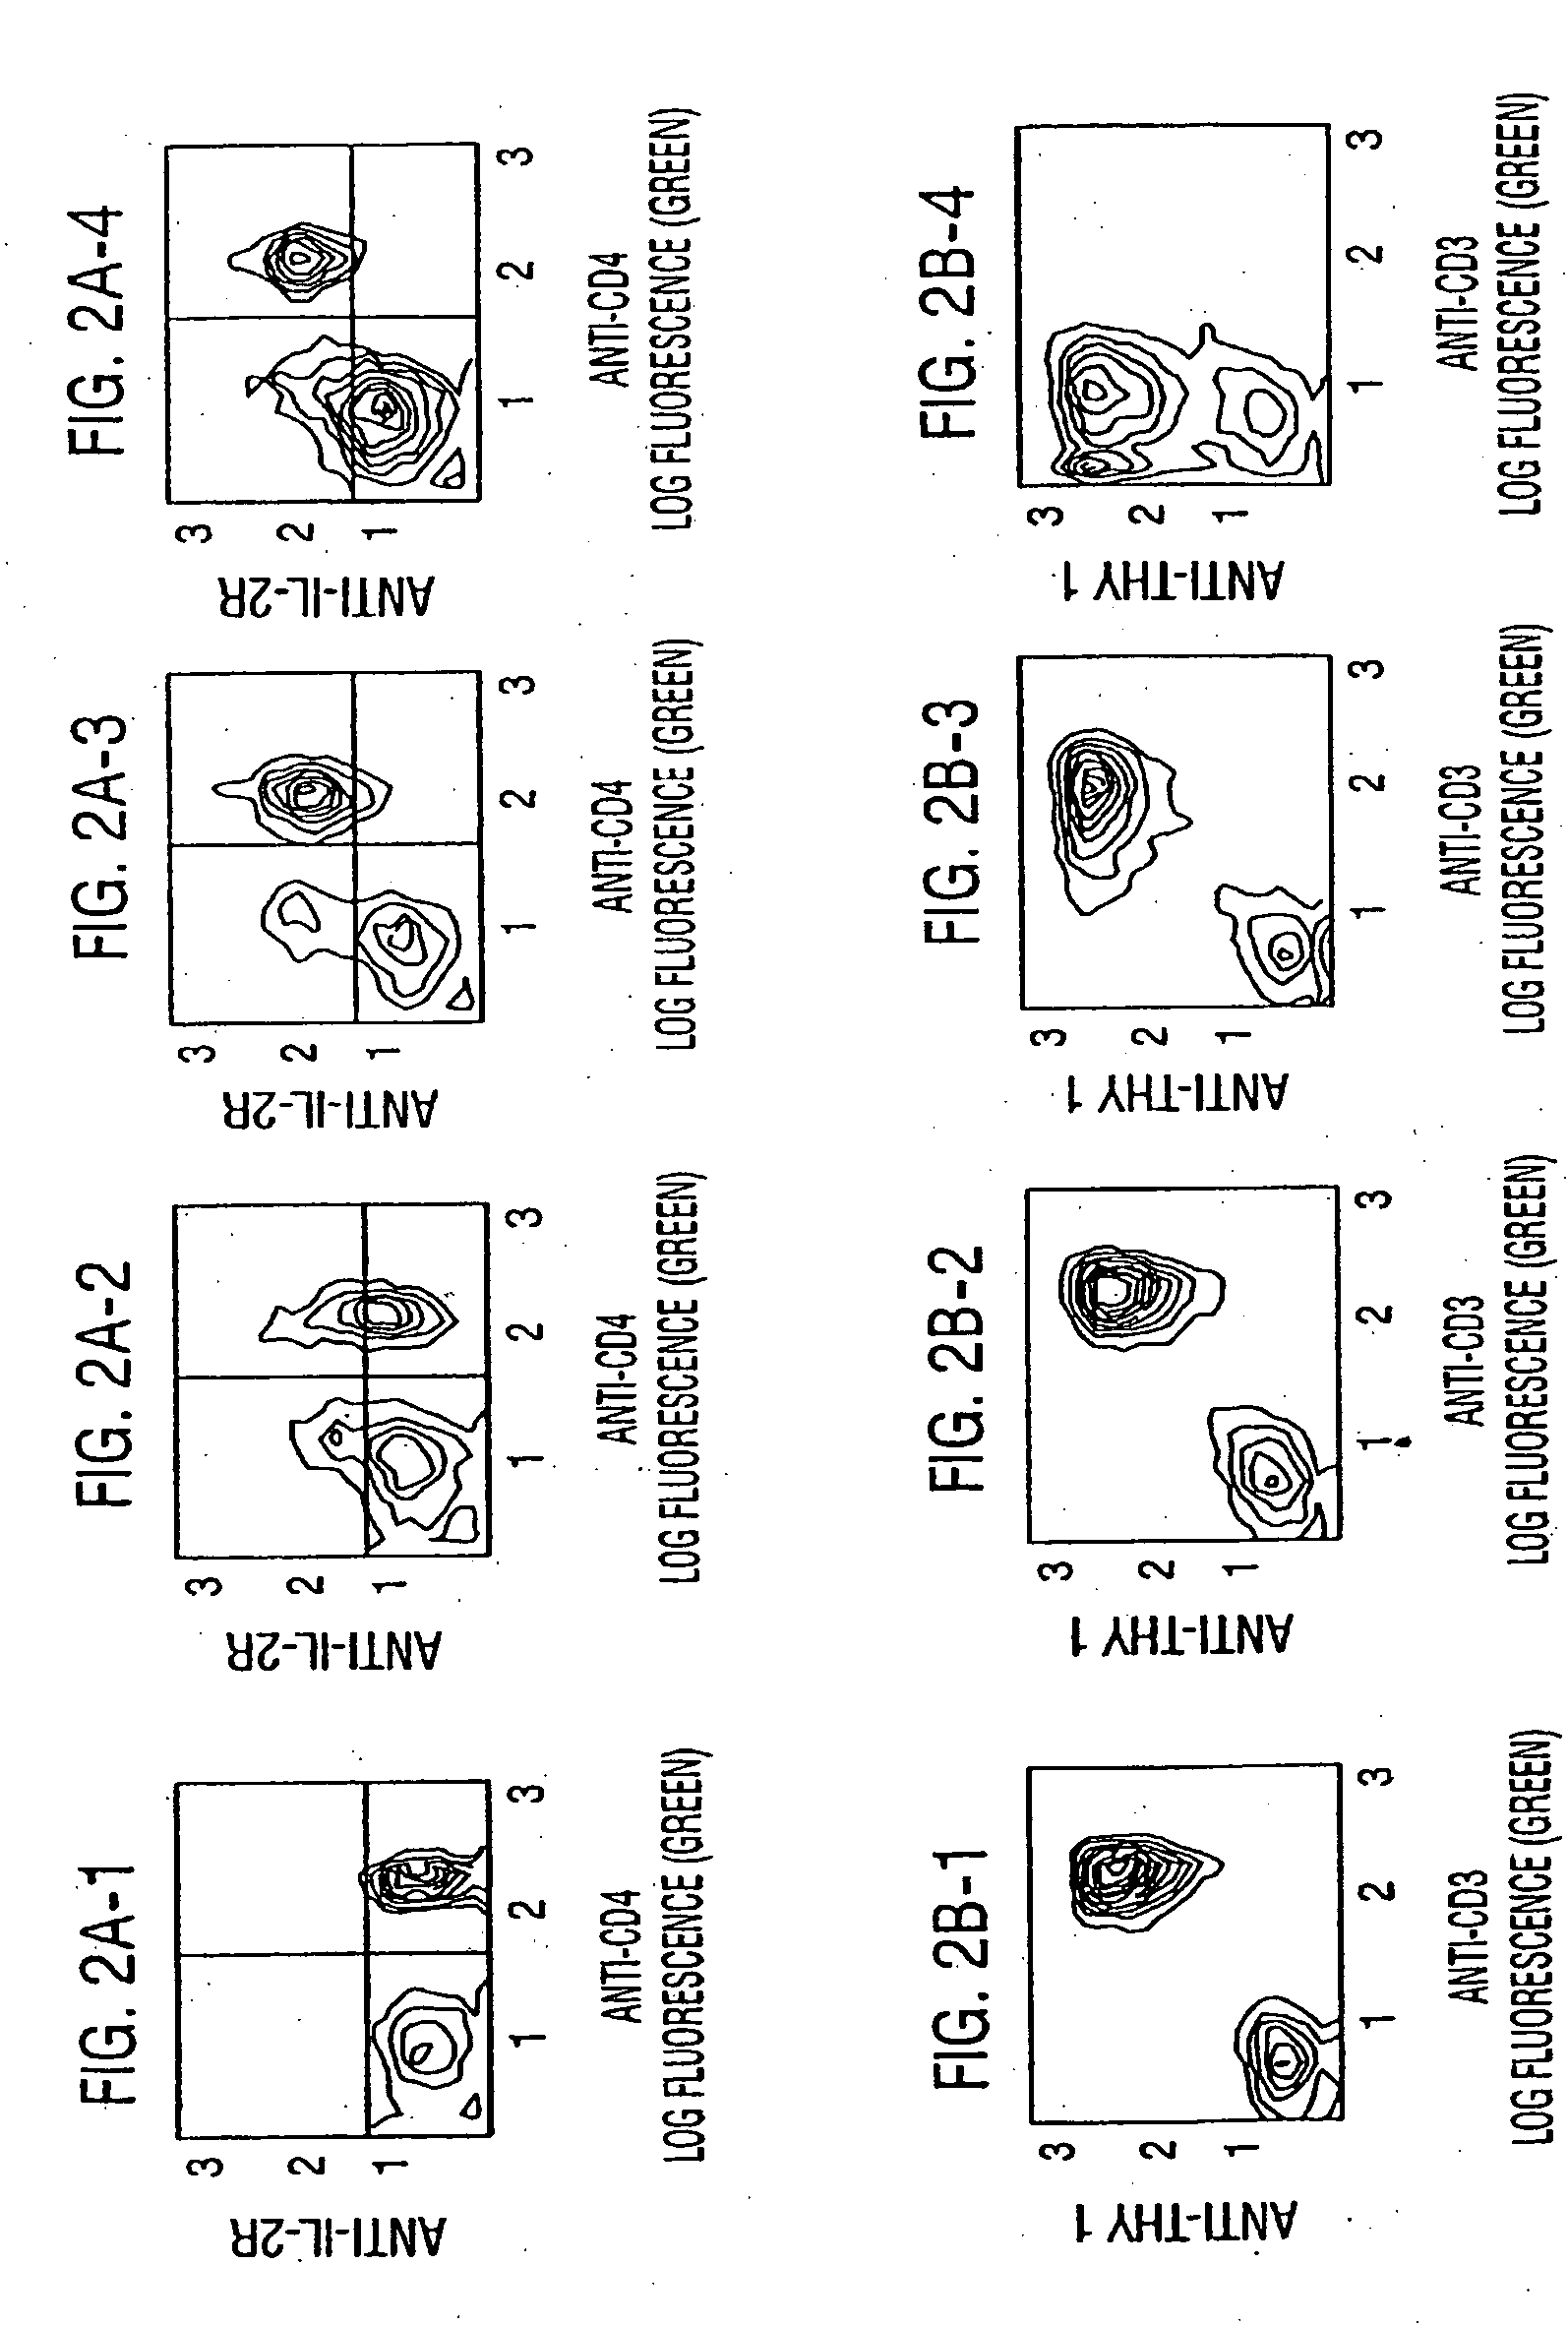 Methods and compositions for promoting immunopotentiation